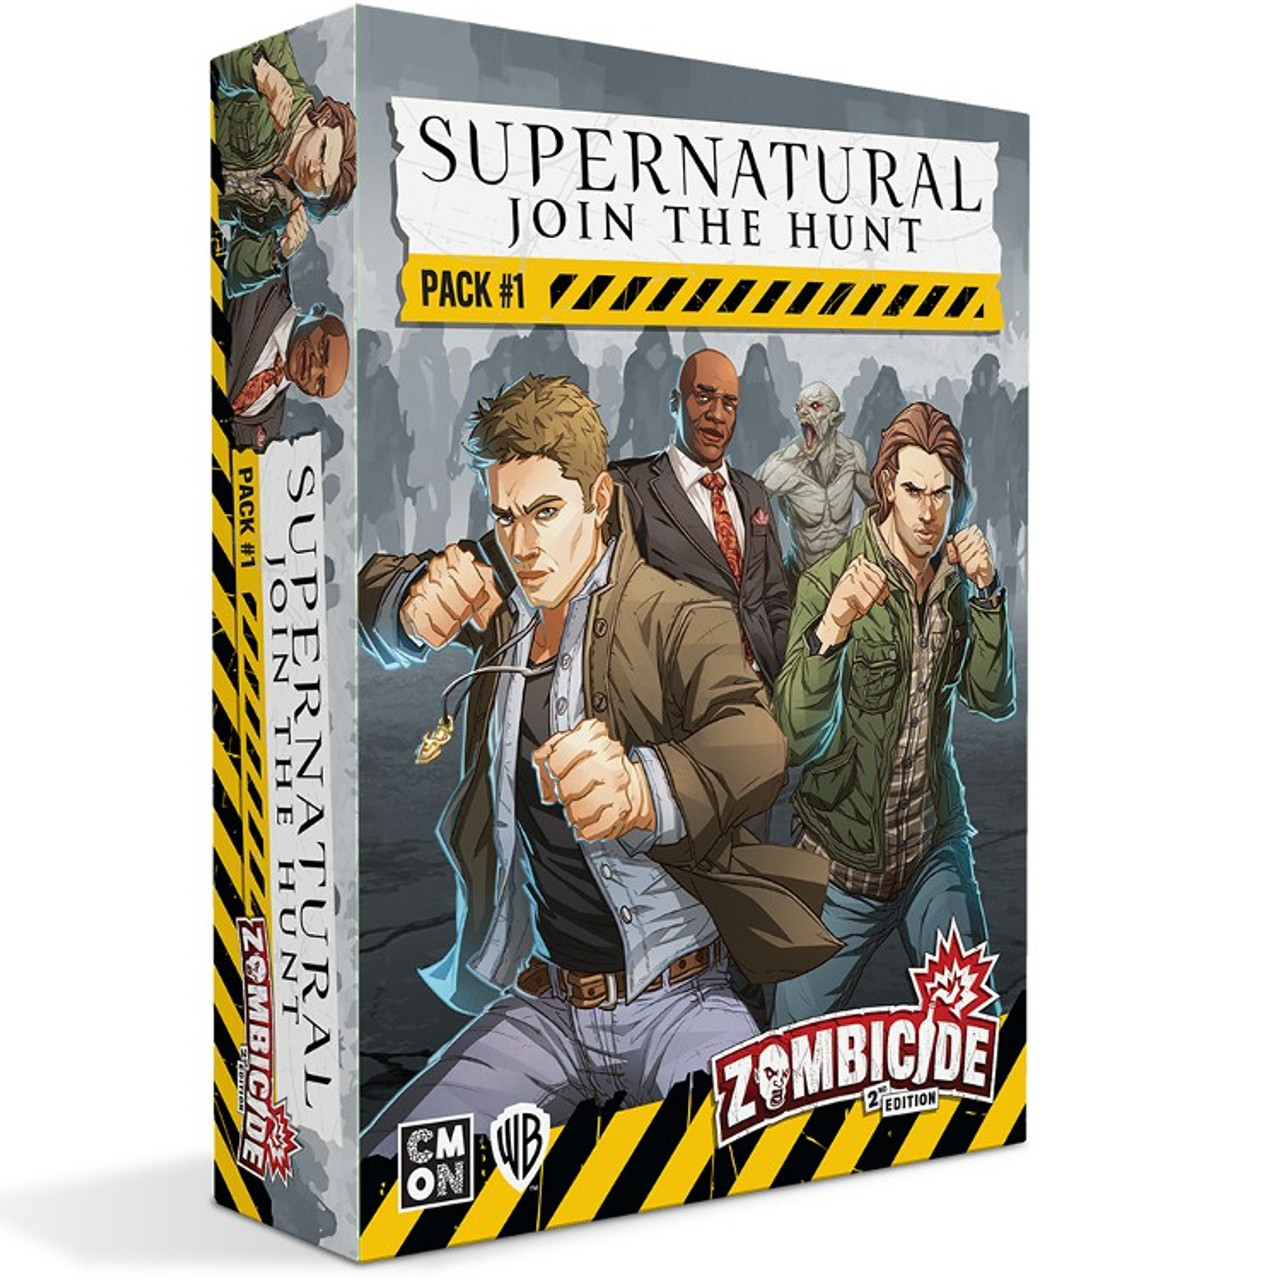 Zombicide: Supernatural Join the Hunt Pack 1